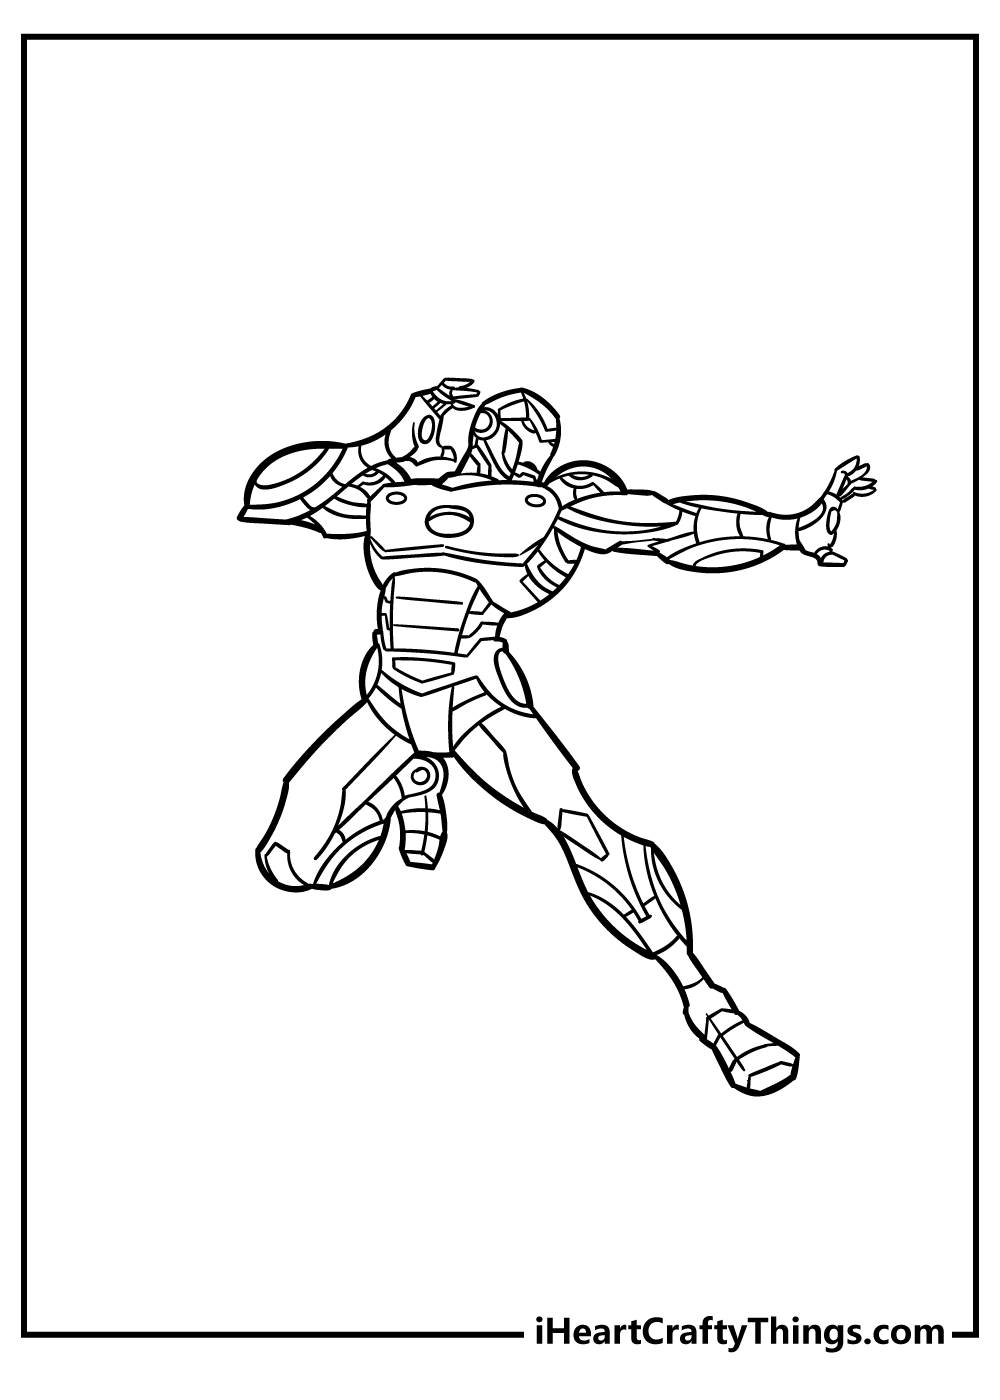 Iron Man Coloring Book for kids free printable